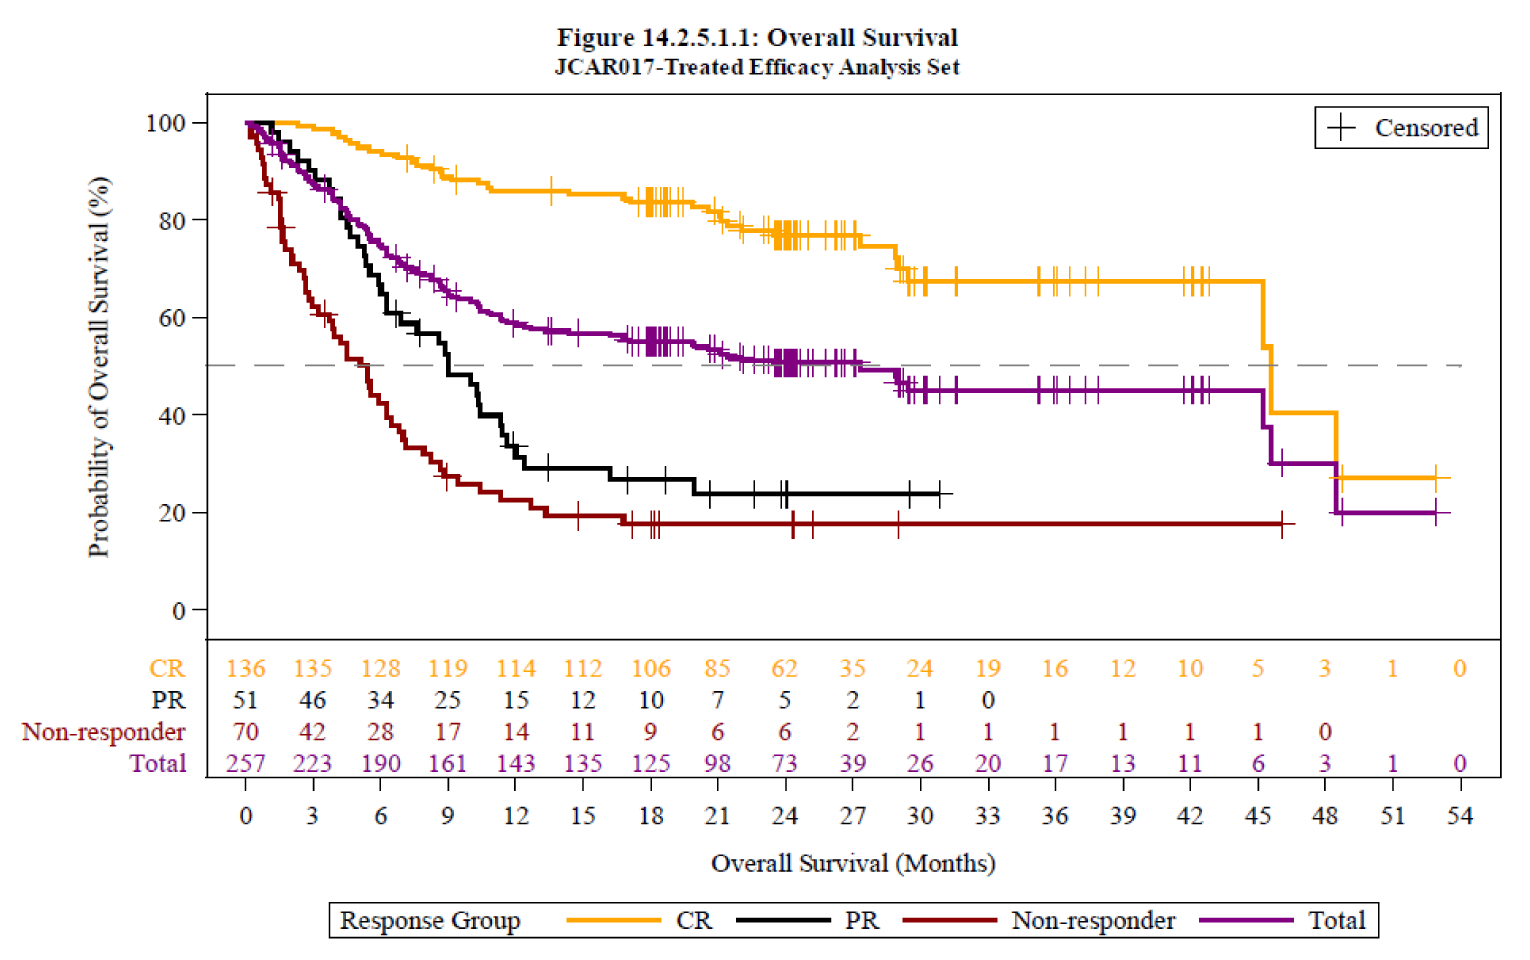 This figure depicts the overall survival curves in the DLBCL efficacy set, starting at 100% survival and reaching 50% between 6, 10, 26, and 47 months for the non-responder, partial response, total, and complete response groups, respectively.